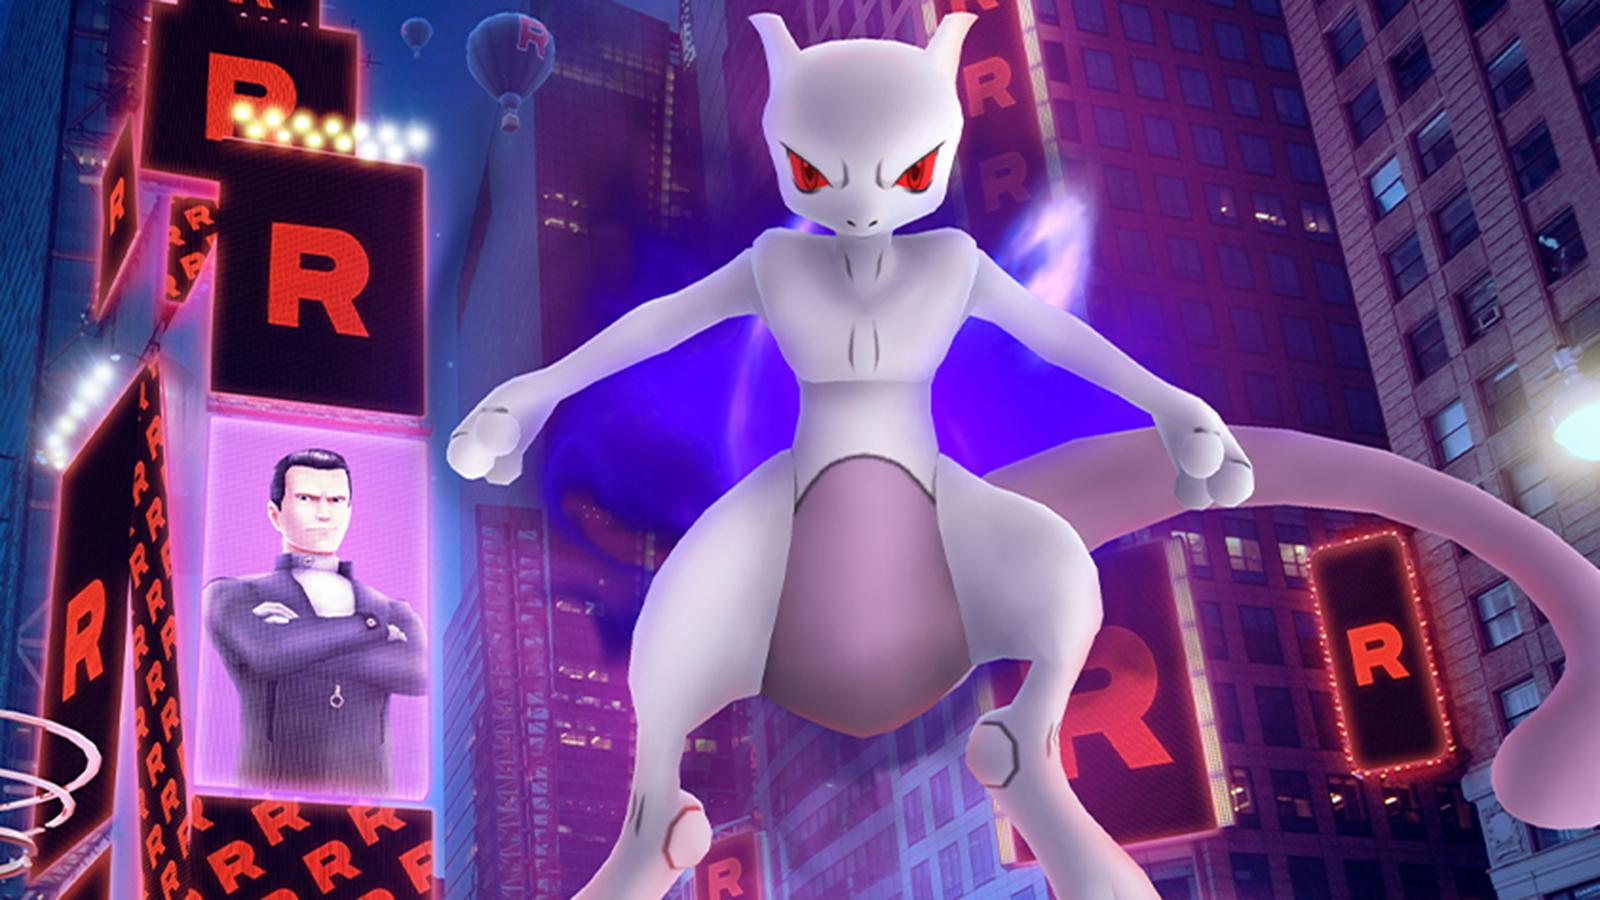 Mewtwo question: if shadow Mewtwo is supposed to the strongest